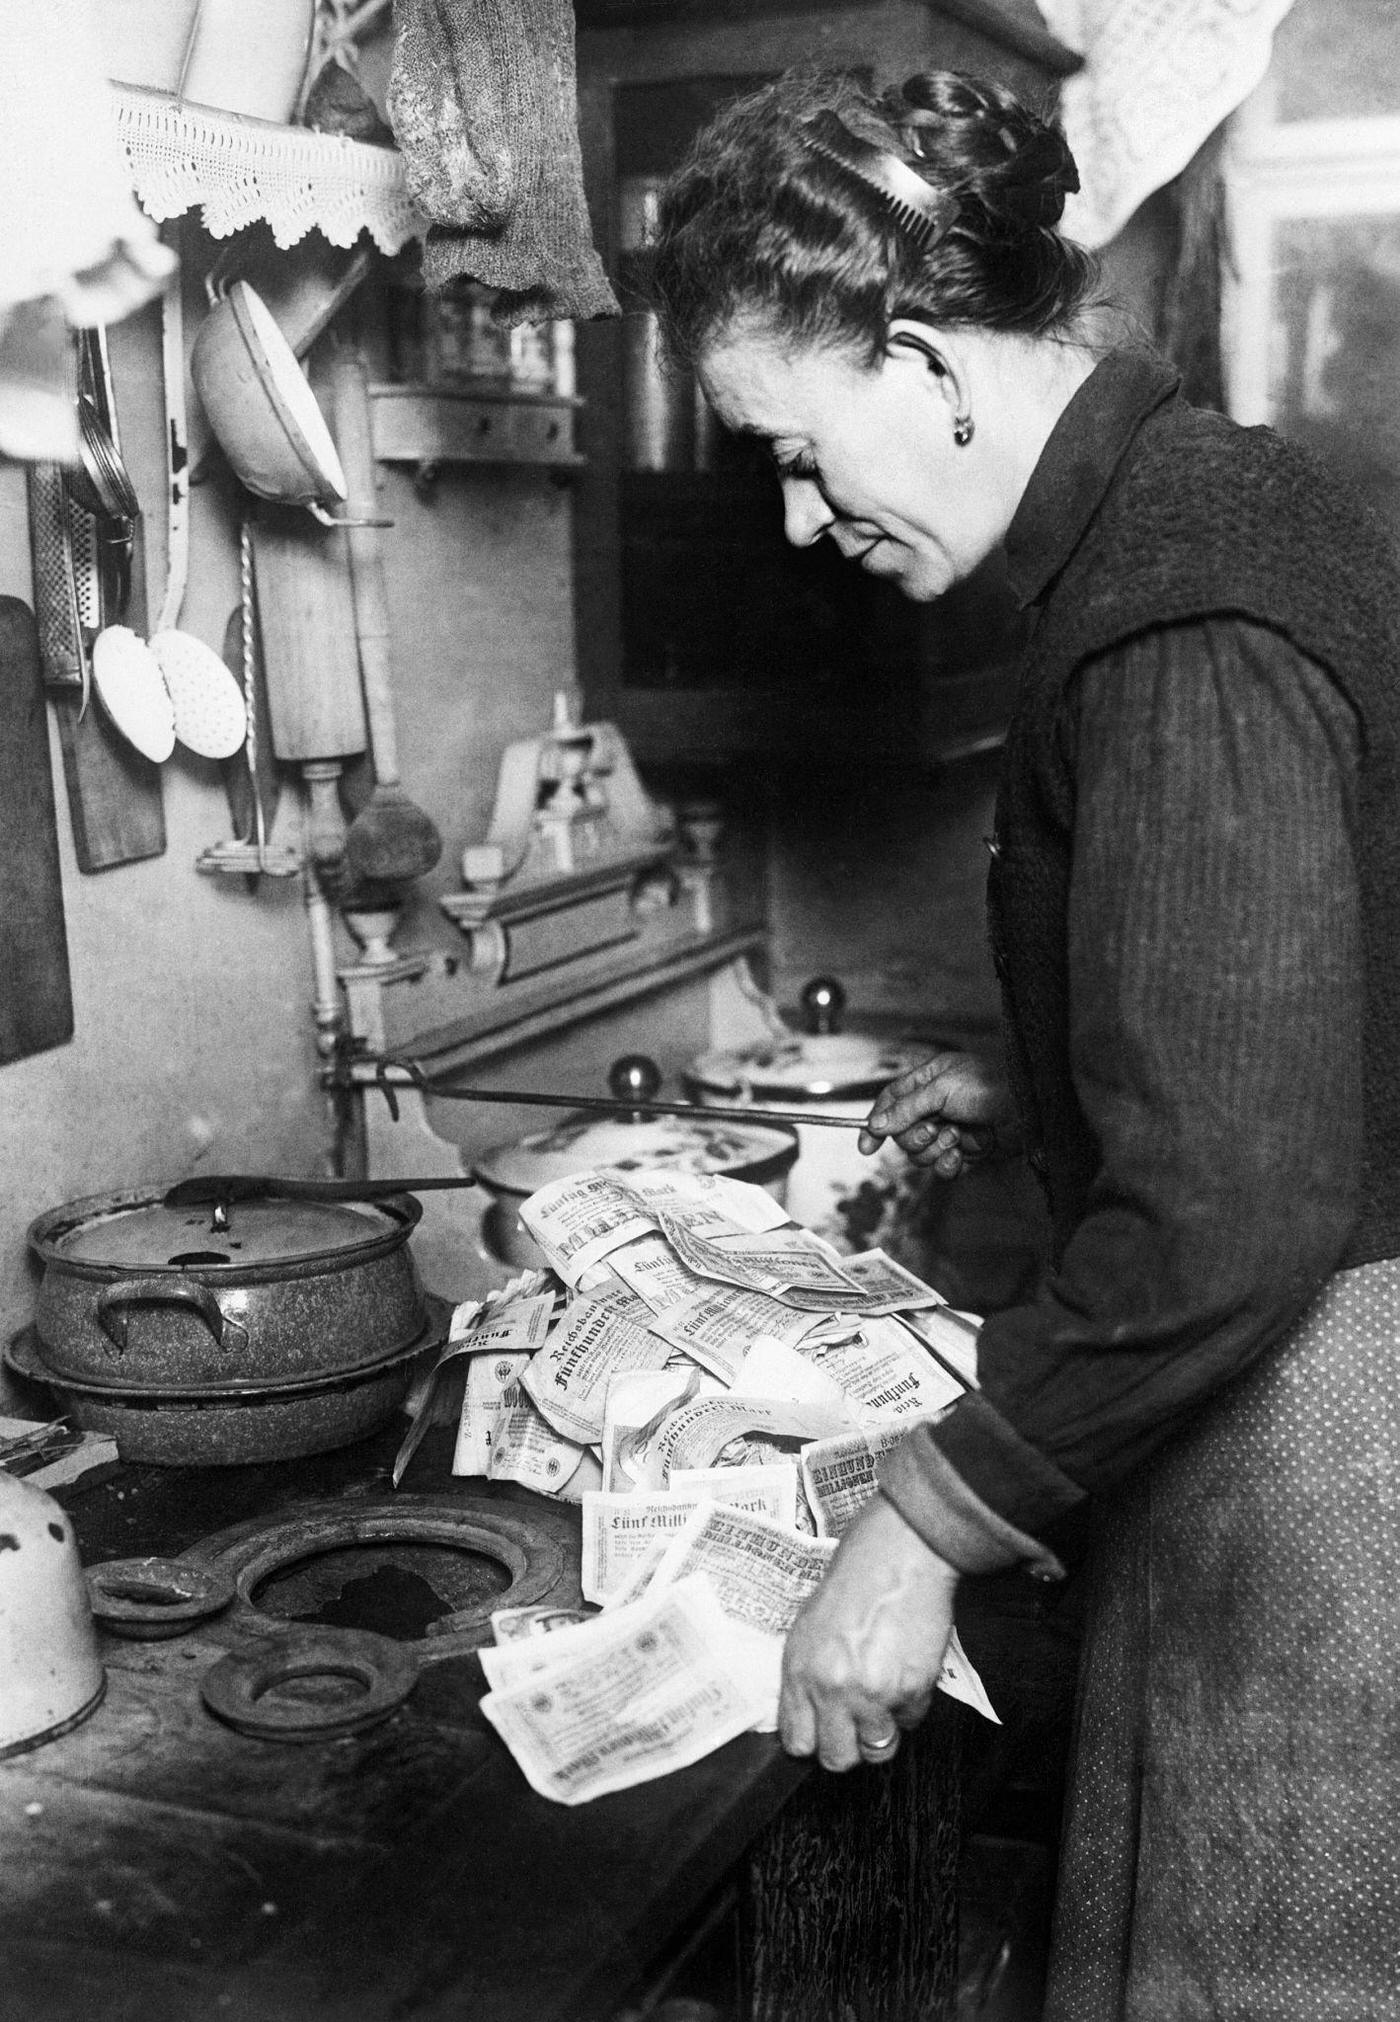 Woman uses money to light stove, Germany's hyperinflation.